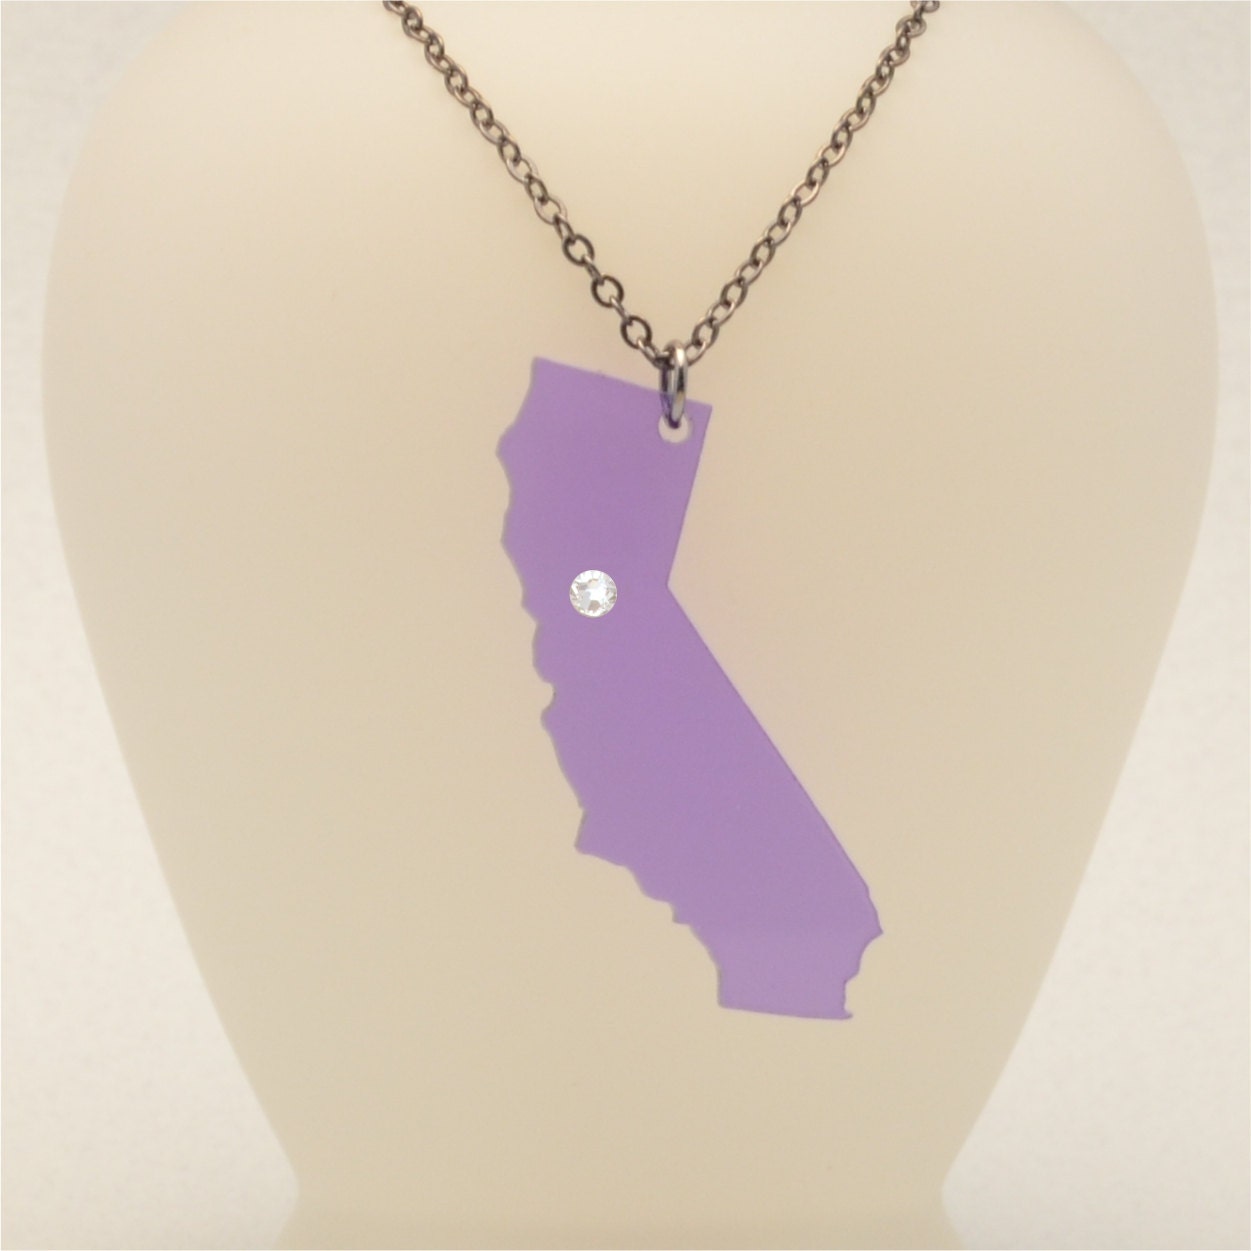 California Birthstone State Necklace - Wood or Acrylic Laser Cut 